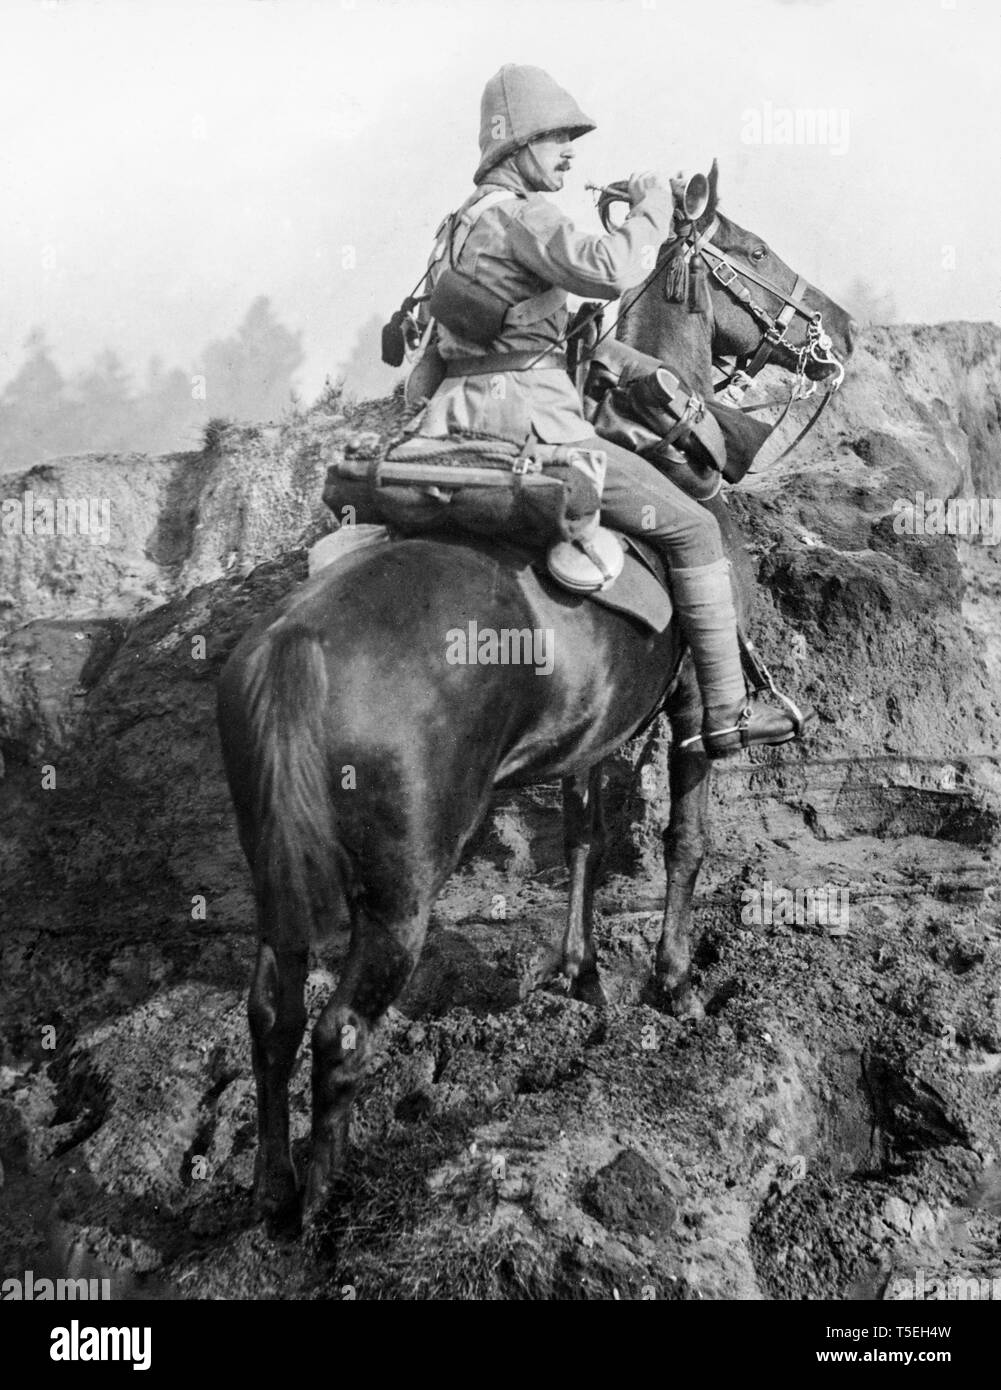 Photograph taken during the Boer War in Southern Africa, showing a bugler from the 13th Hussars, a British Regiment, on horseback. Stock Photo